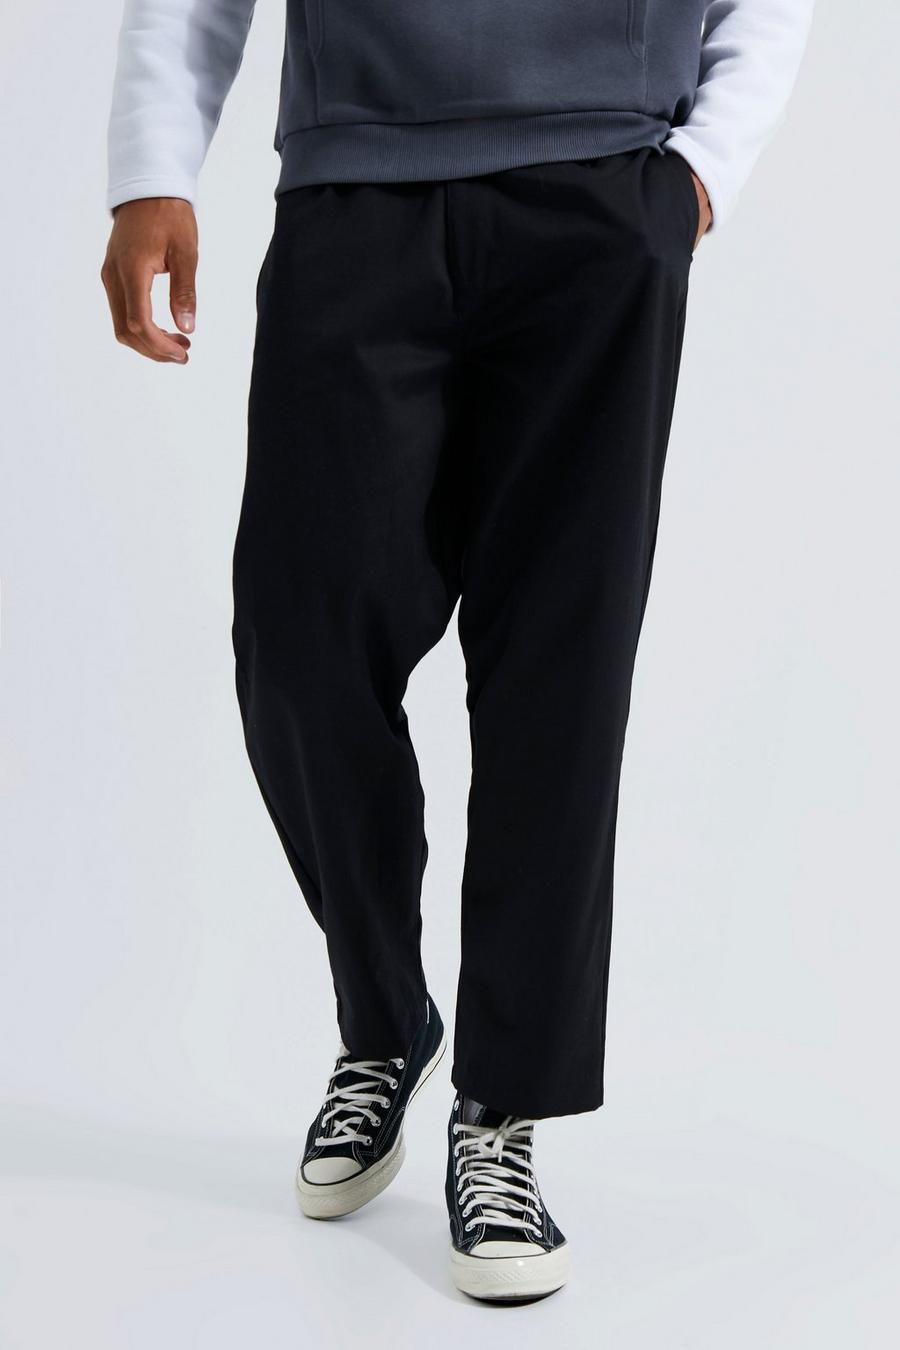 Mens Tall Trousers | Trousers For Tall Men | boohoo UK